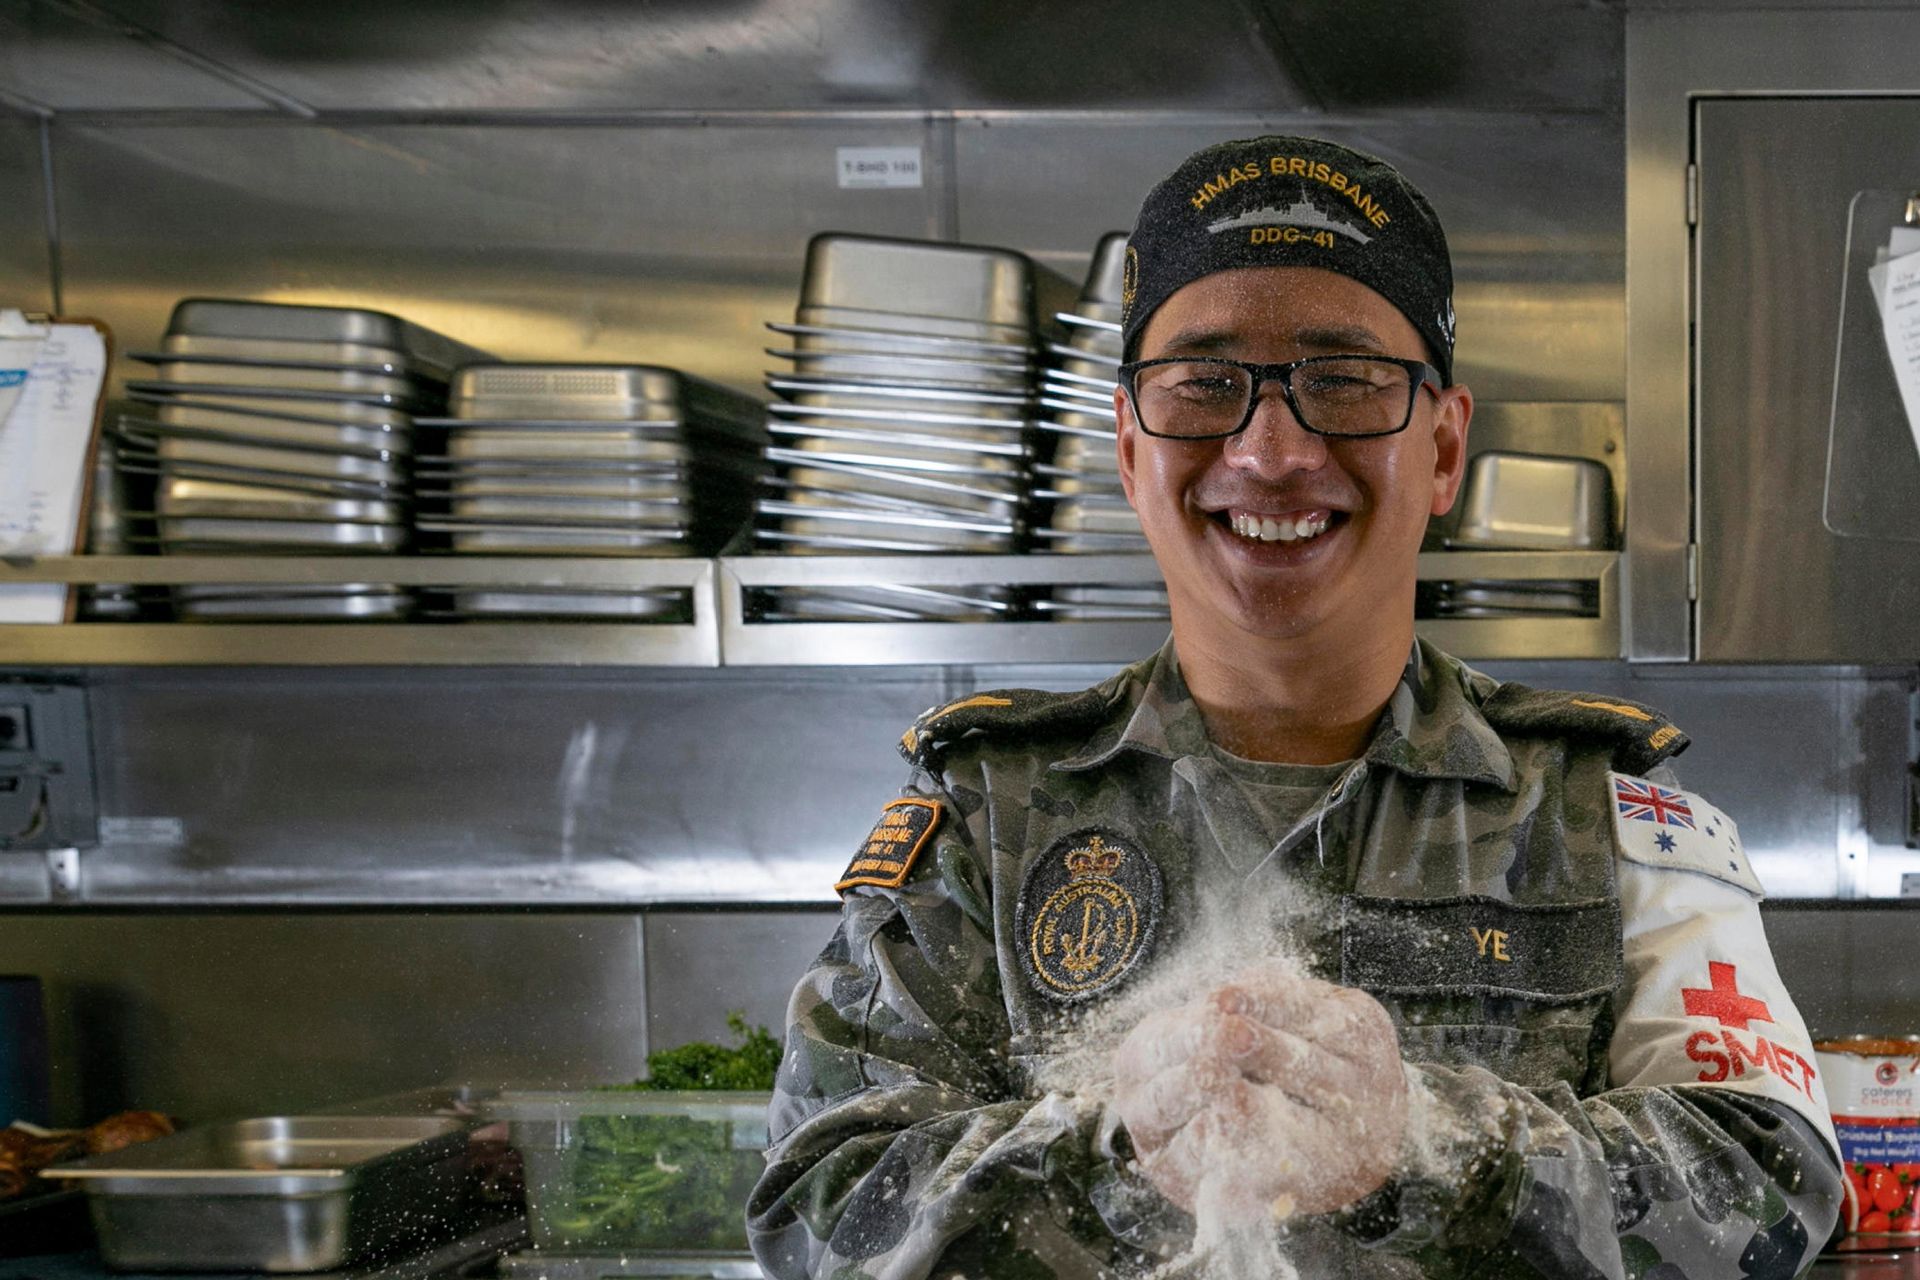 A Navy Chef working in the kitchen.